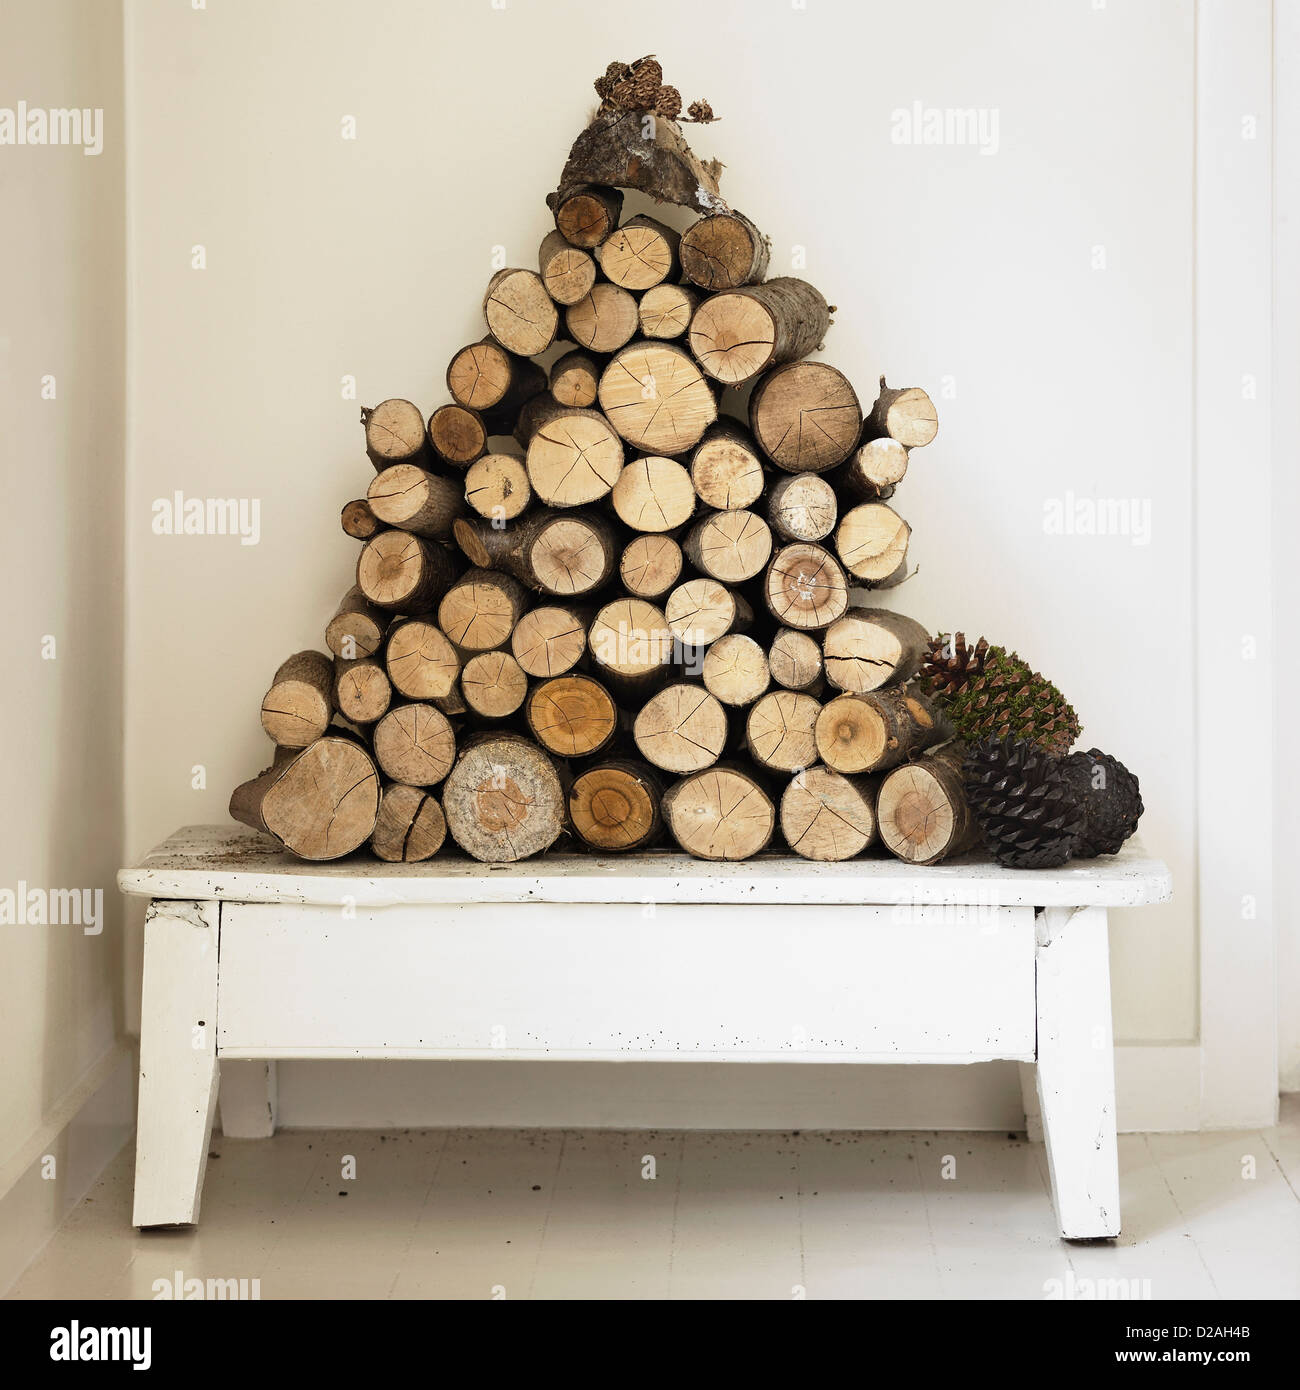 Pile of firewood on bench Stock Photo